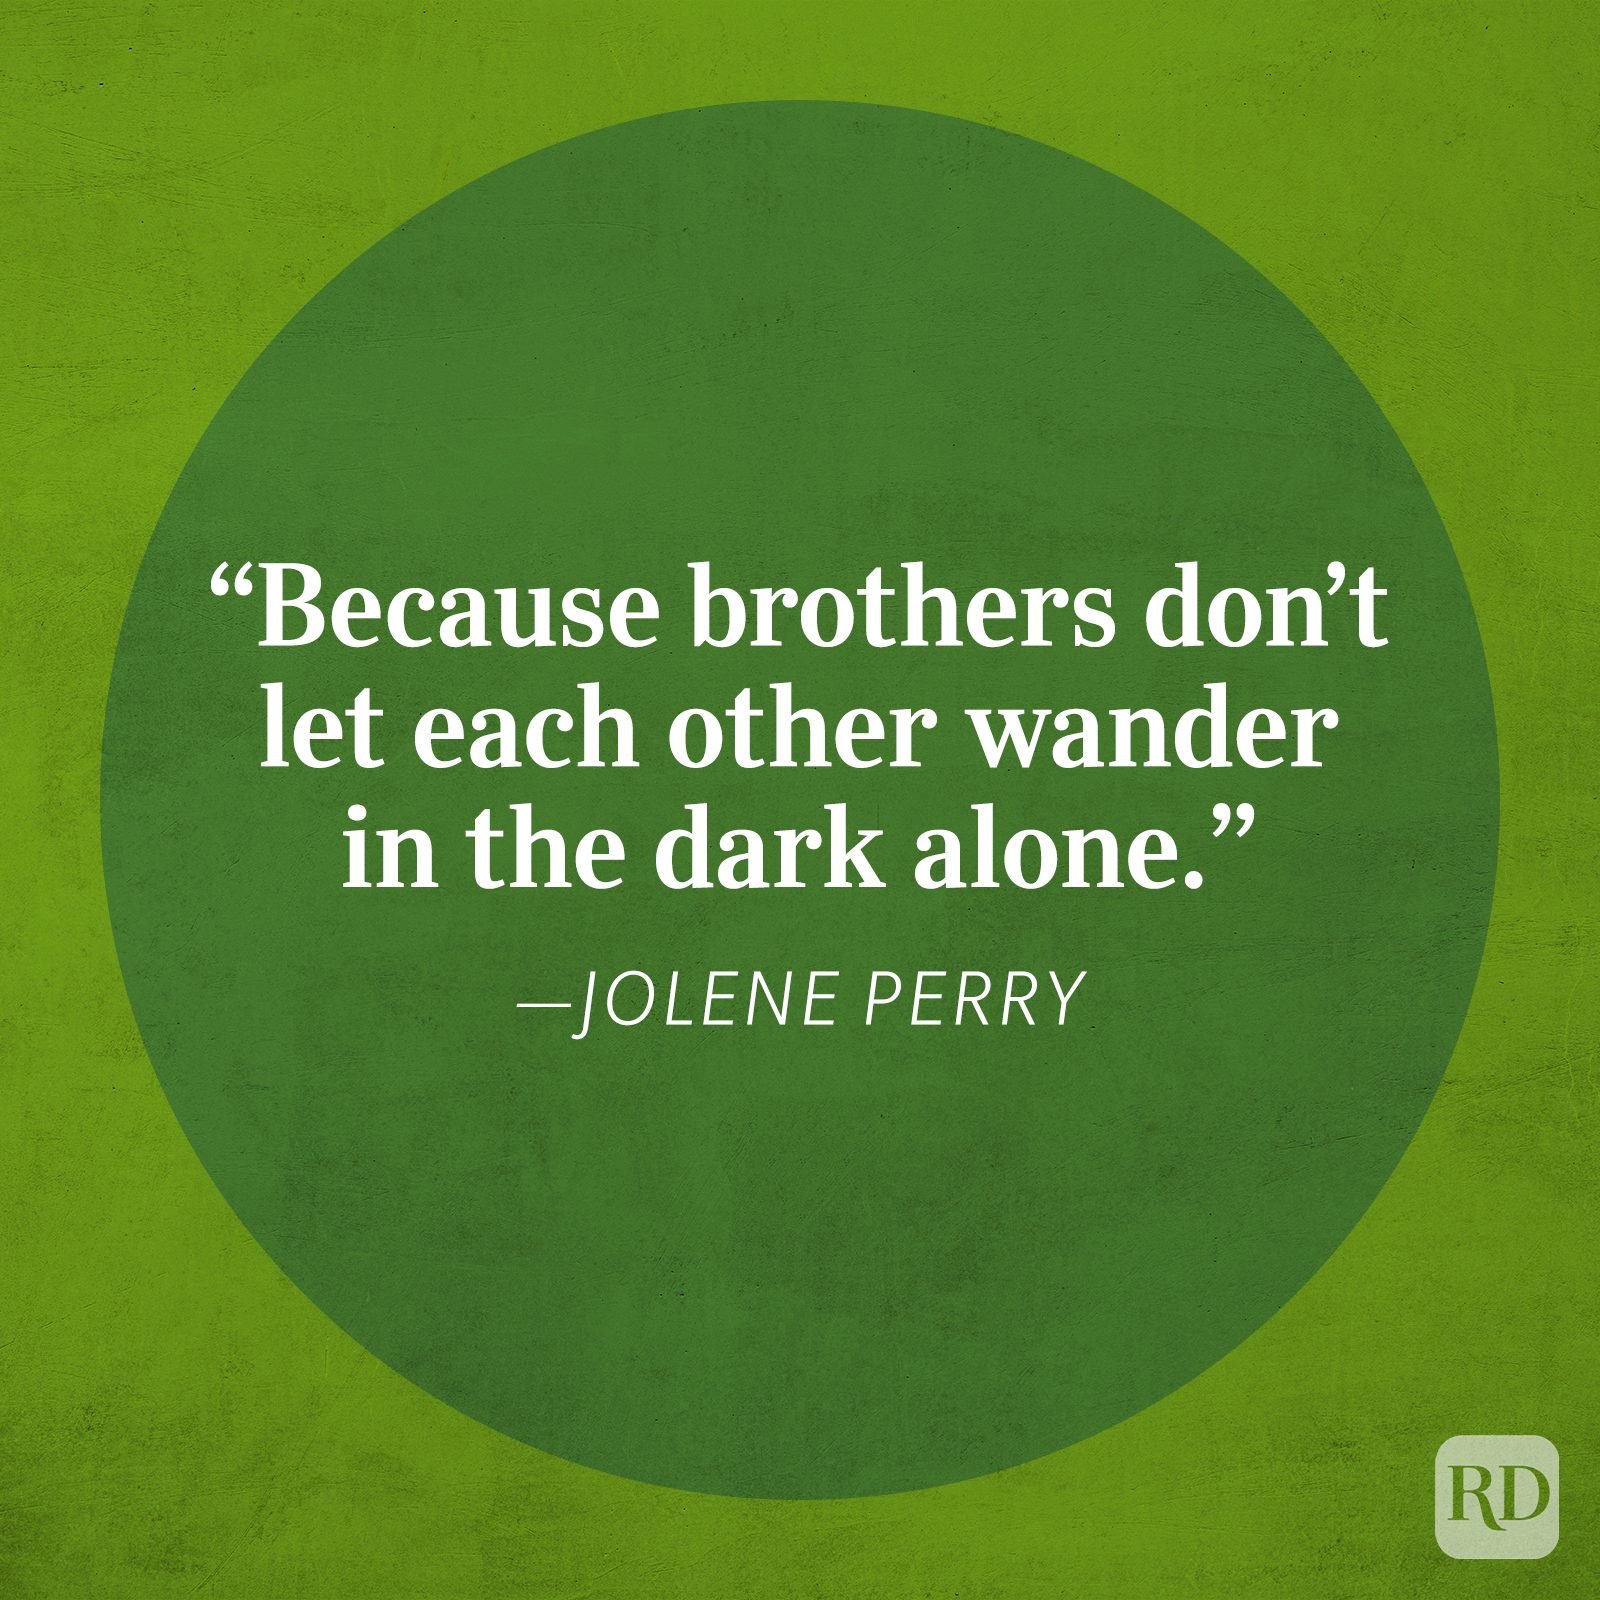 "Because brothers don't let each other wander in the dark alone." -Jolene Perry